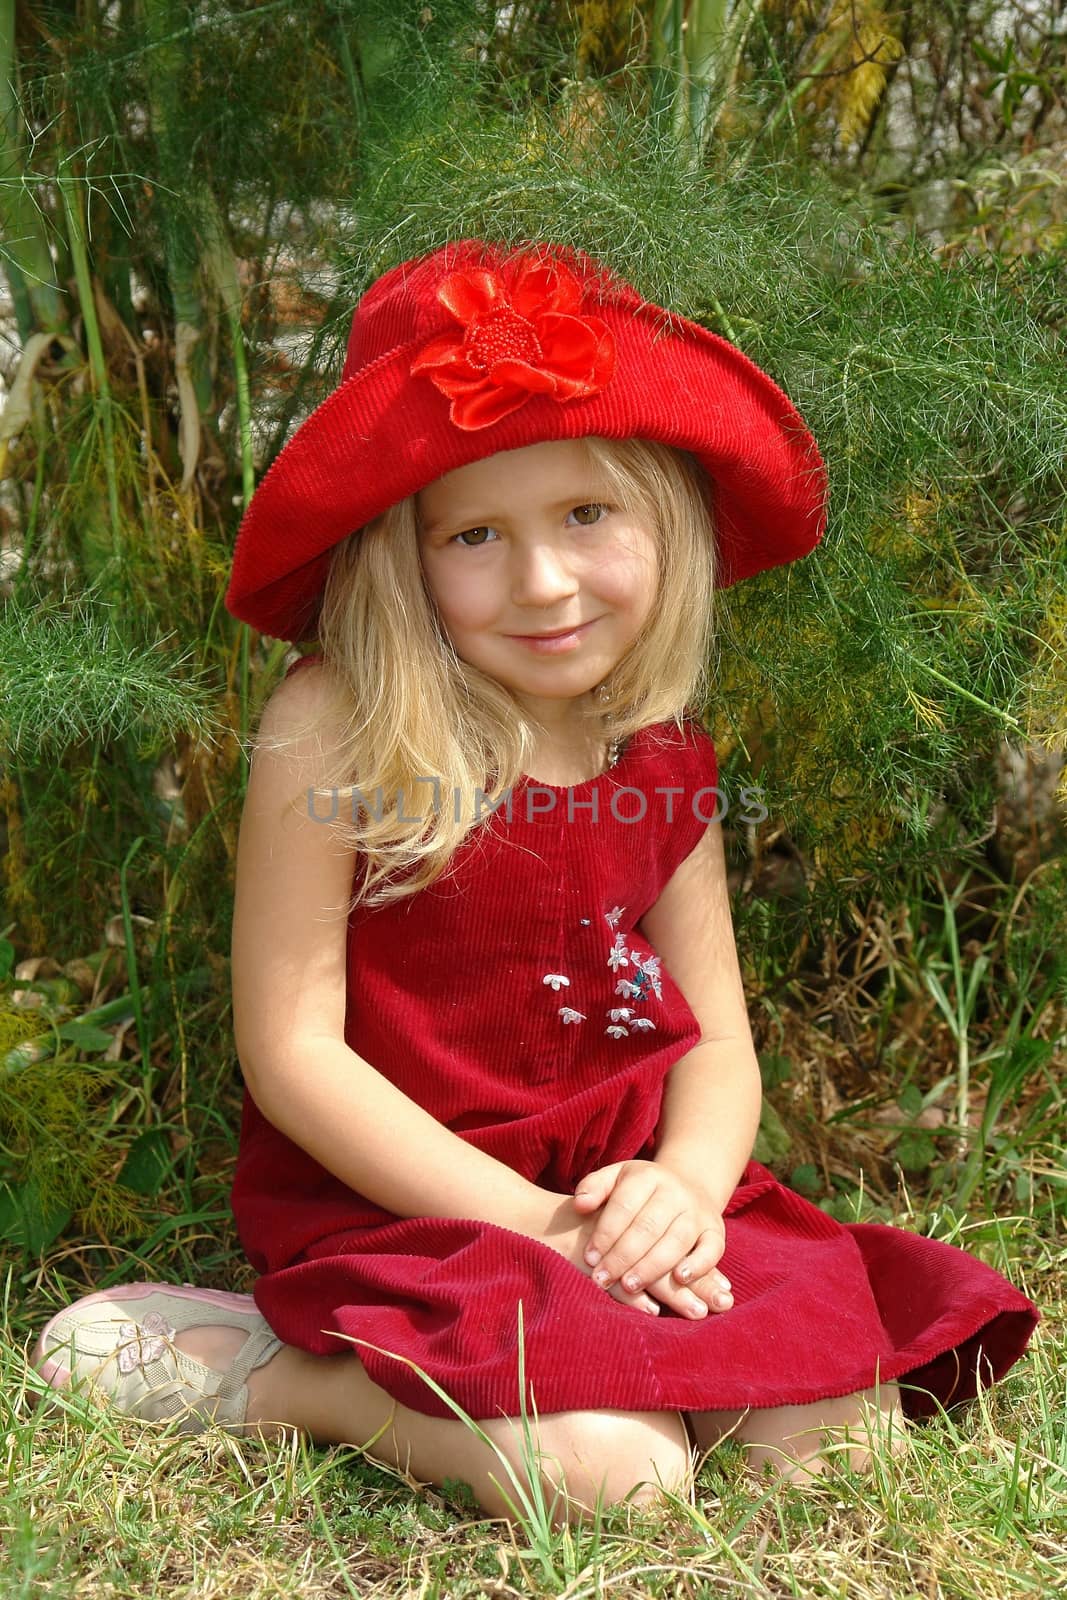 Girl in the red hat.